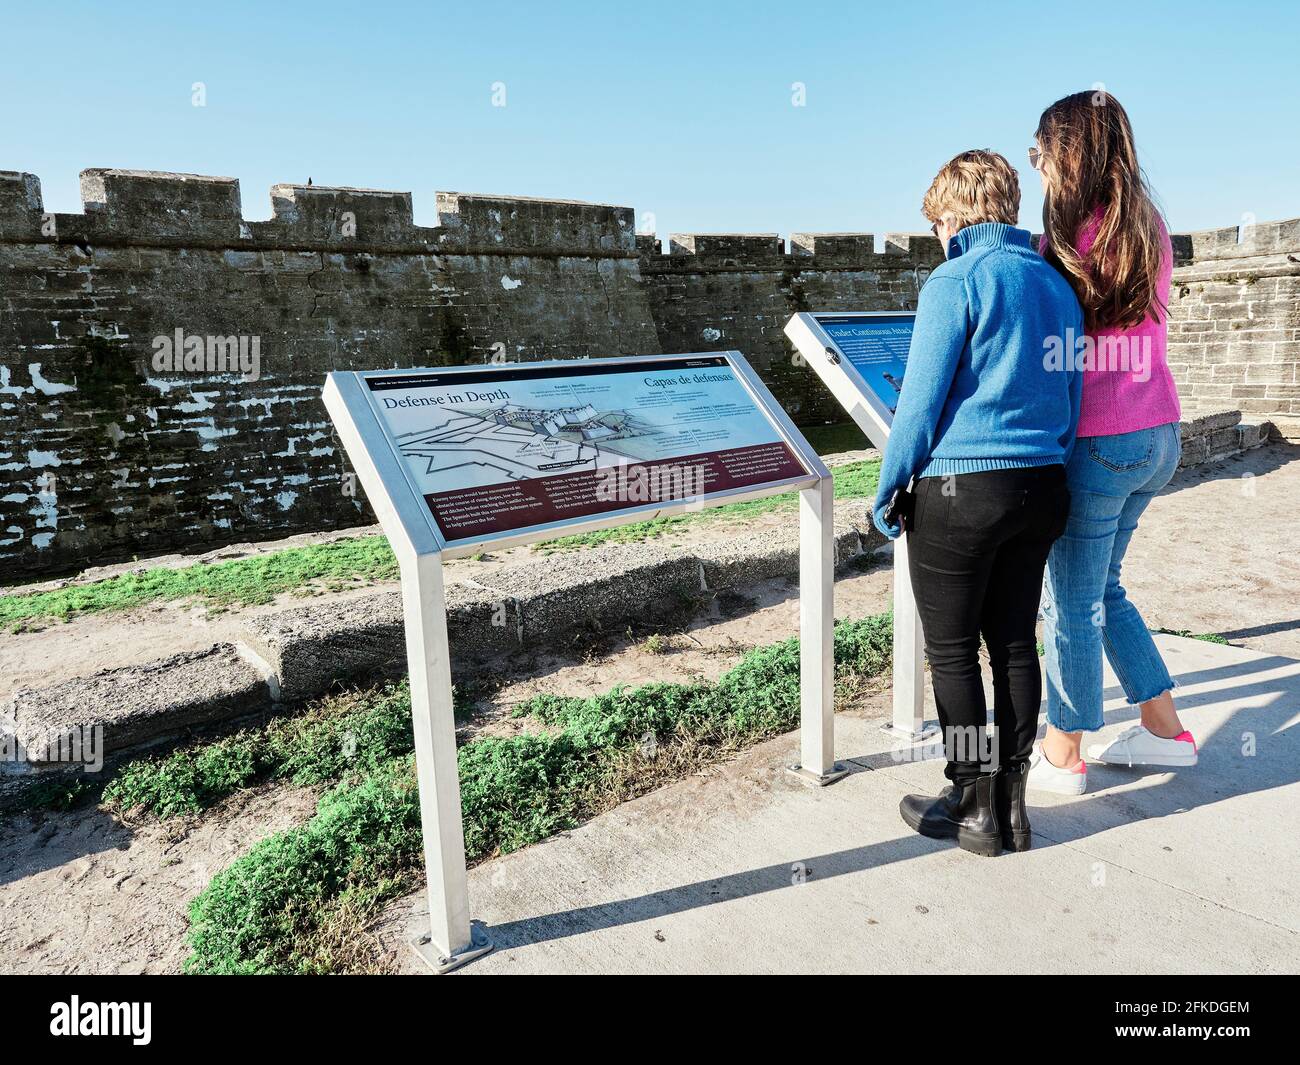 Women tourists at the Castillo de San Marcos a large Spanish stone fortress or fort built in the 1600's guards the port in St. Augustine Florida, USA. Stock Photo